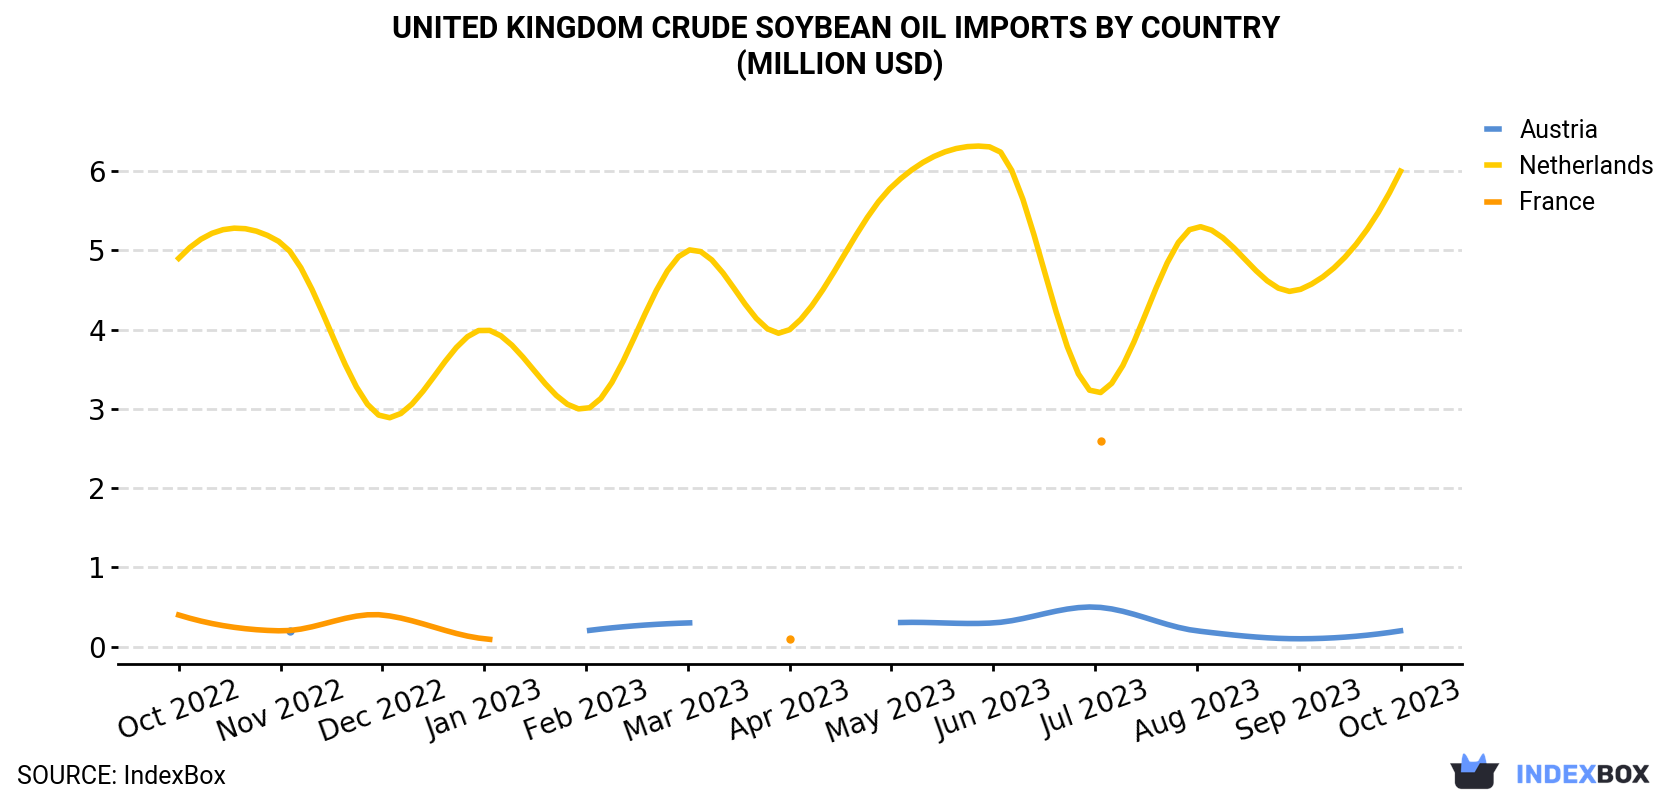 United Kingdom Crude Soybean Oil Imports By Country (Million USD)